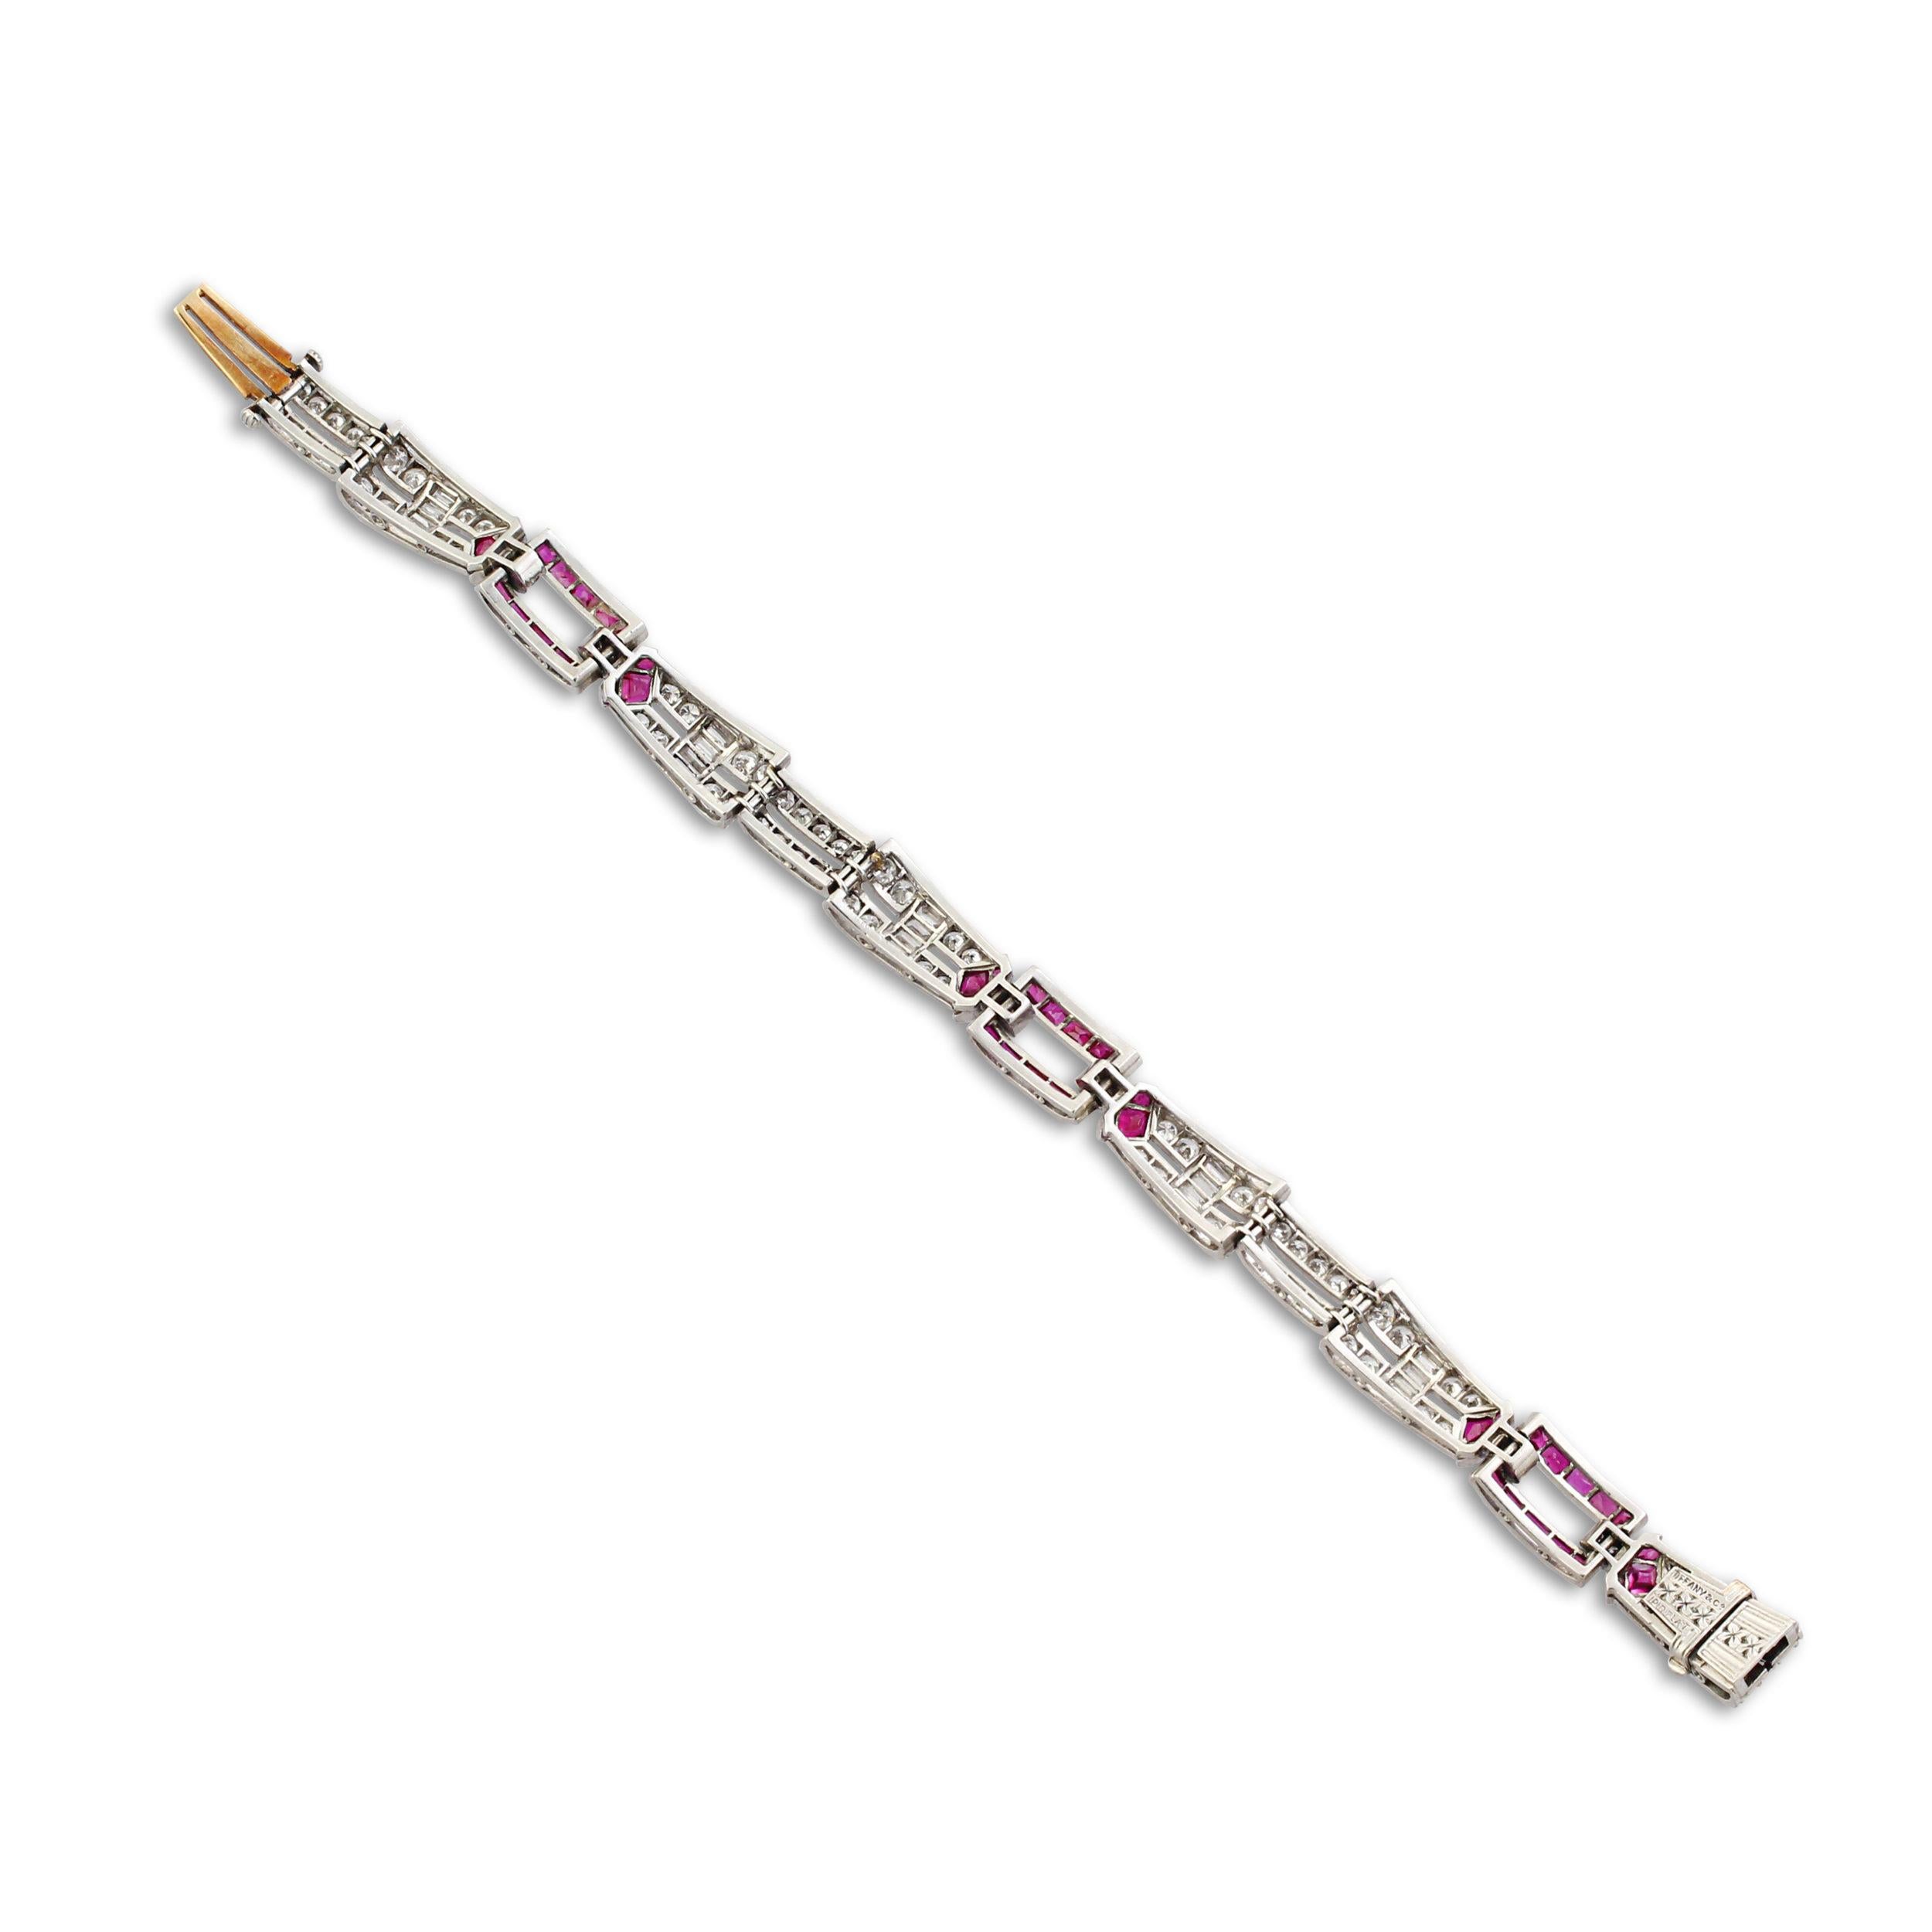 An elegant Art Deco platinum, ruby and diamond bracelet by Tiffany & Co. Set with calibre-cut rubies and round and baguette cut diamonds in an openwork geometric link design. Slim and slender, this beautiful bracelet can be easily stacked with